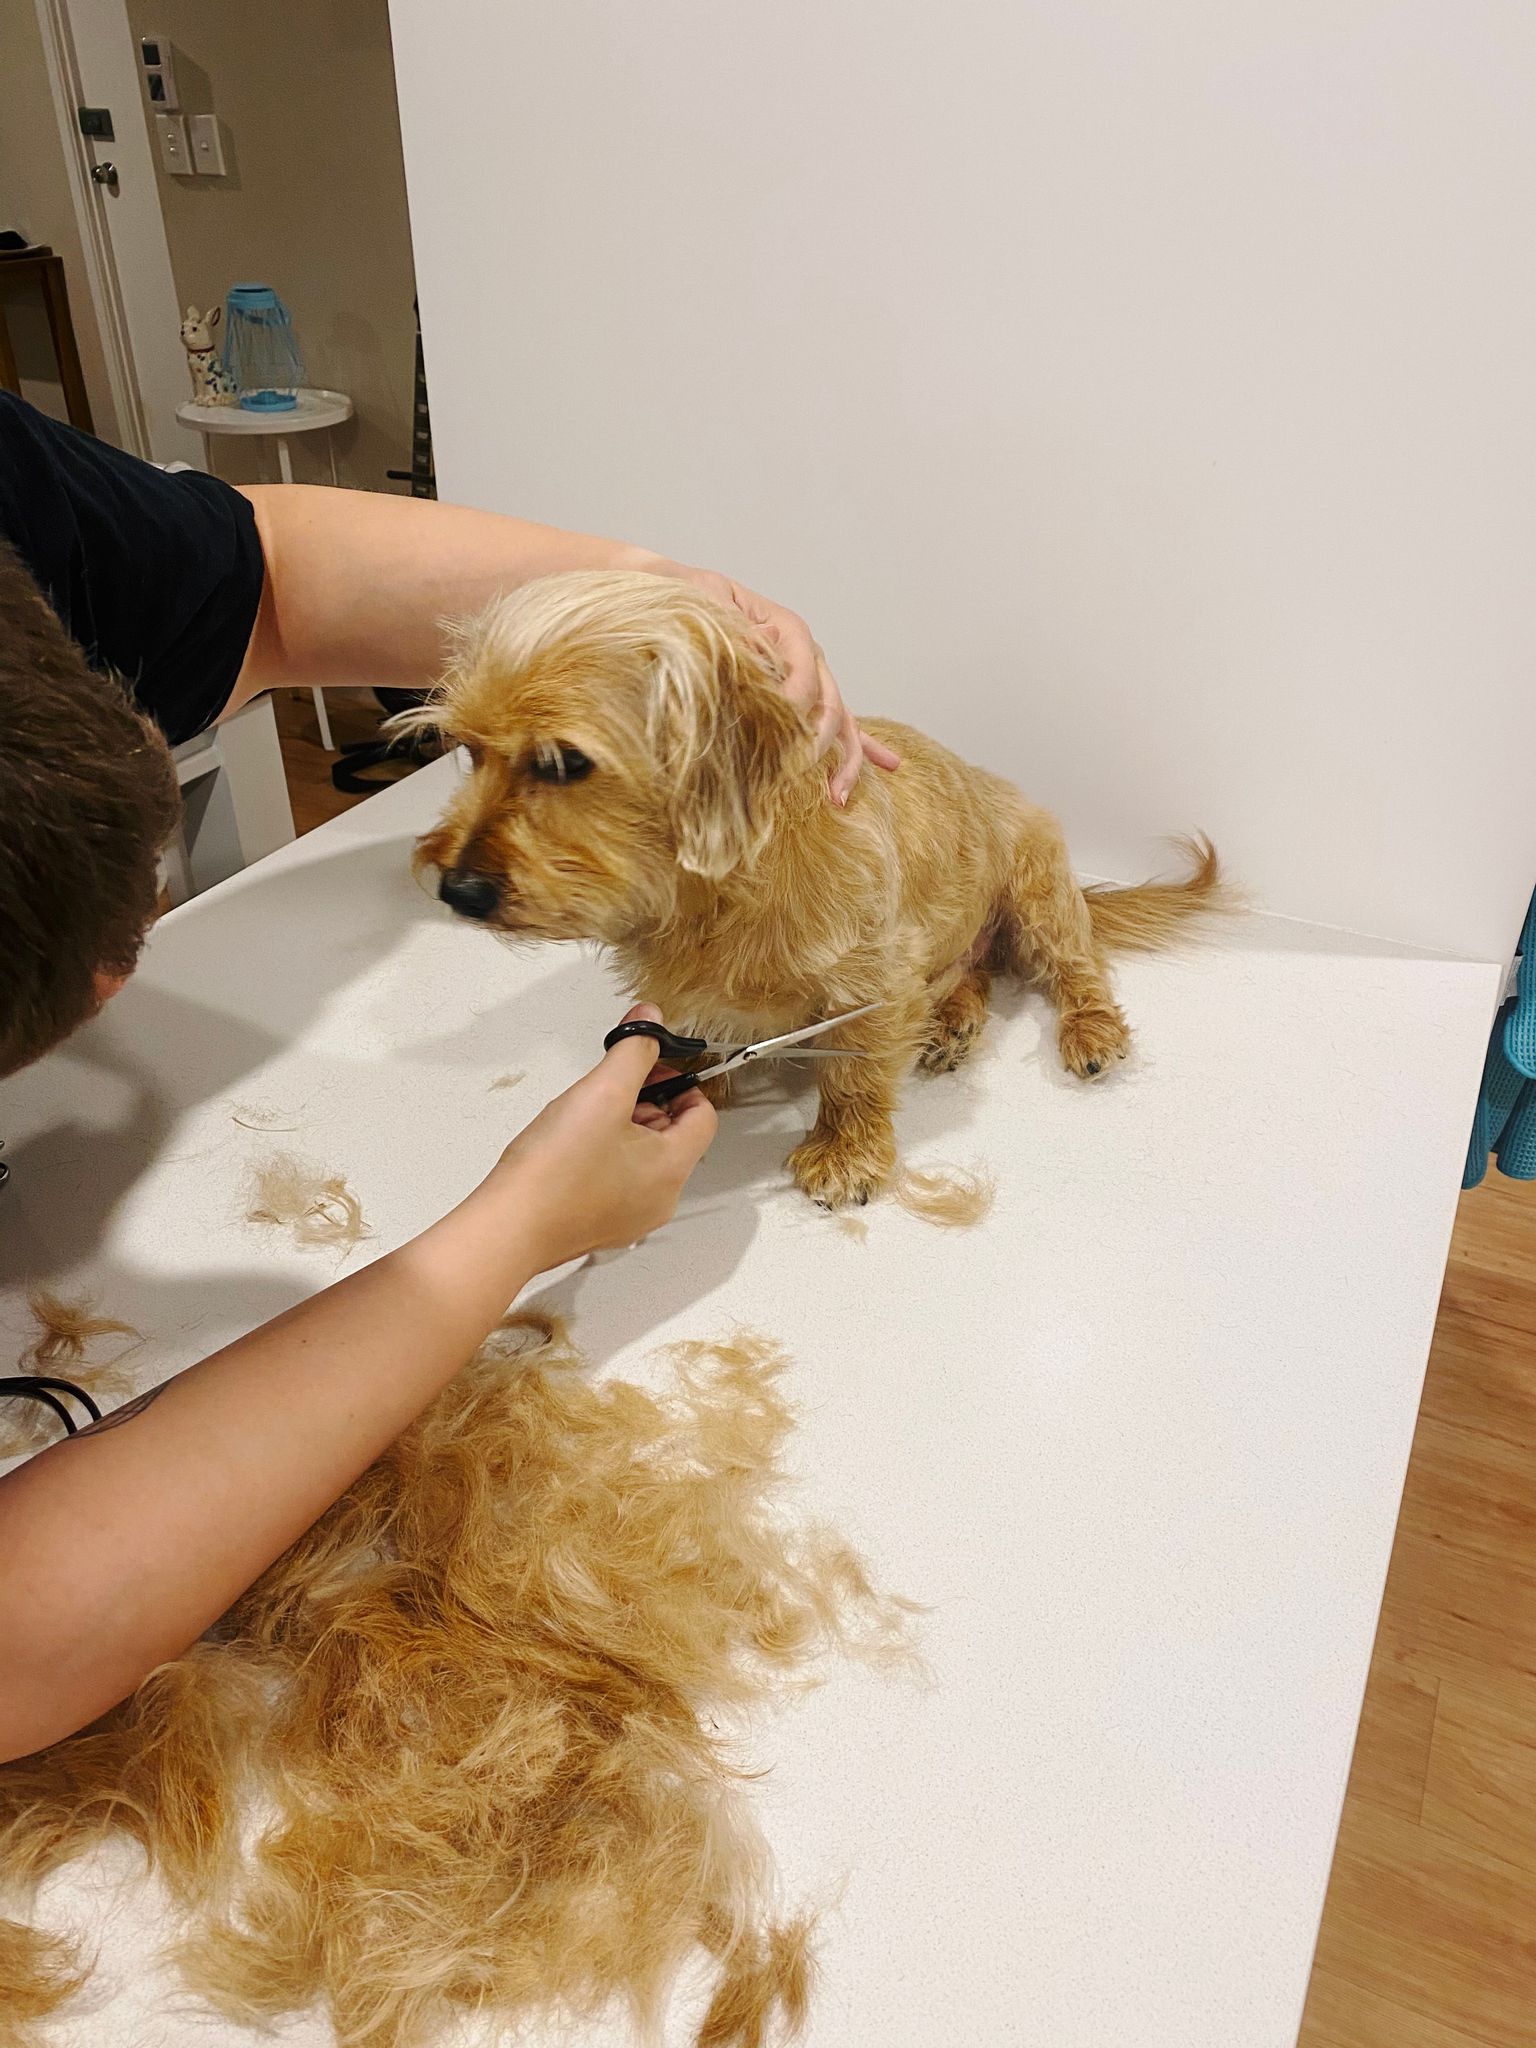 A photo of a small not-as-scruffy-as-before dog sitting on a countertop next to a huge pile of hair while a woman is leaning around him trimming his front leg hair with scissors.